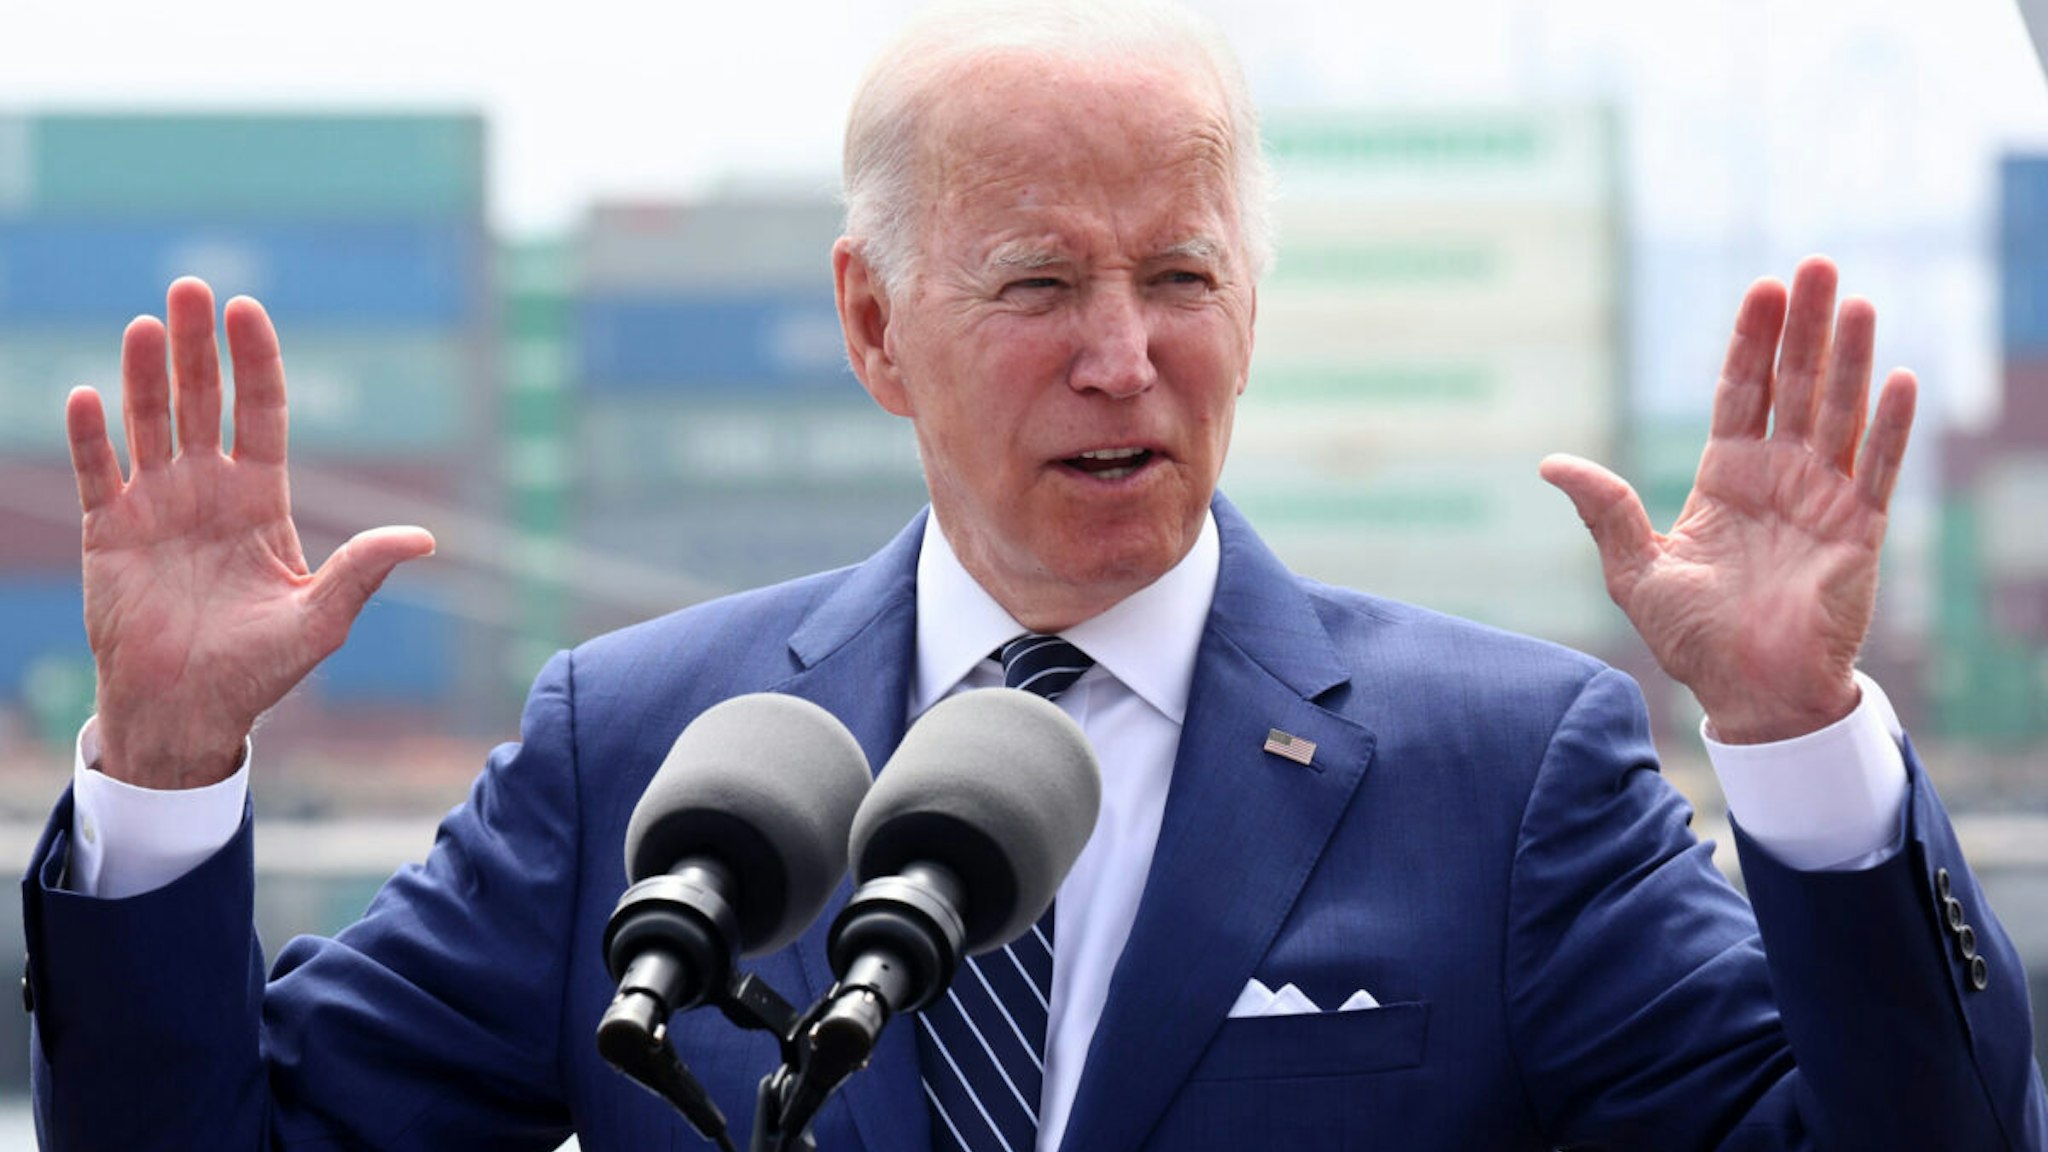 U.S. President Joe Biden delivers remarks aboard the Battleship USS Iowa Museum at the Port of Los Angeles on June 10, 2022 in Los Angeles, California.